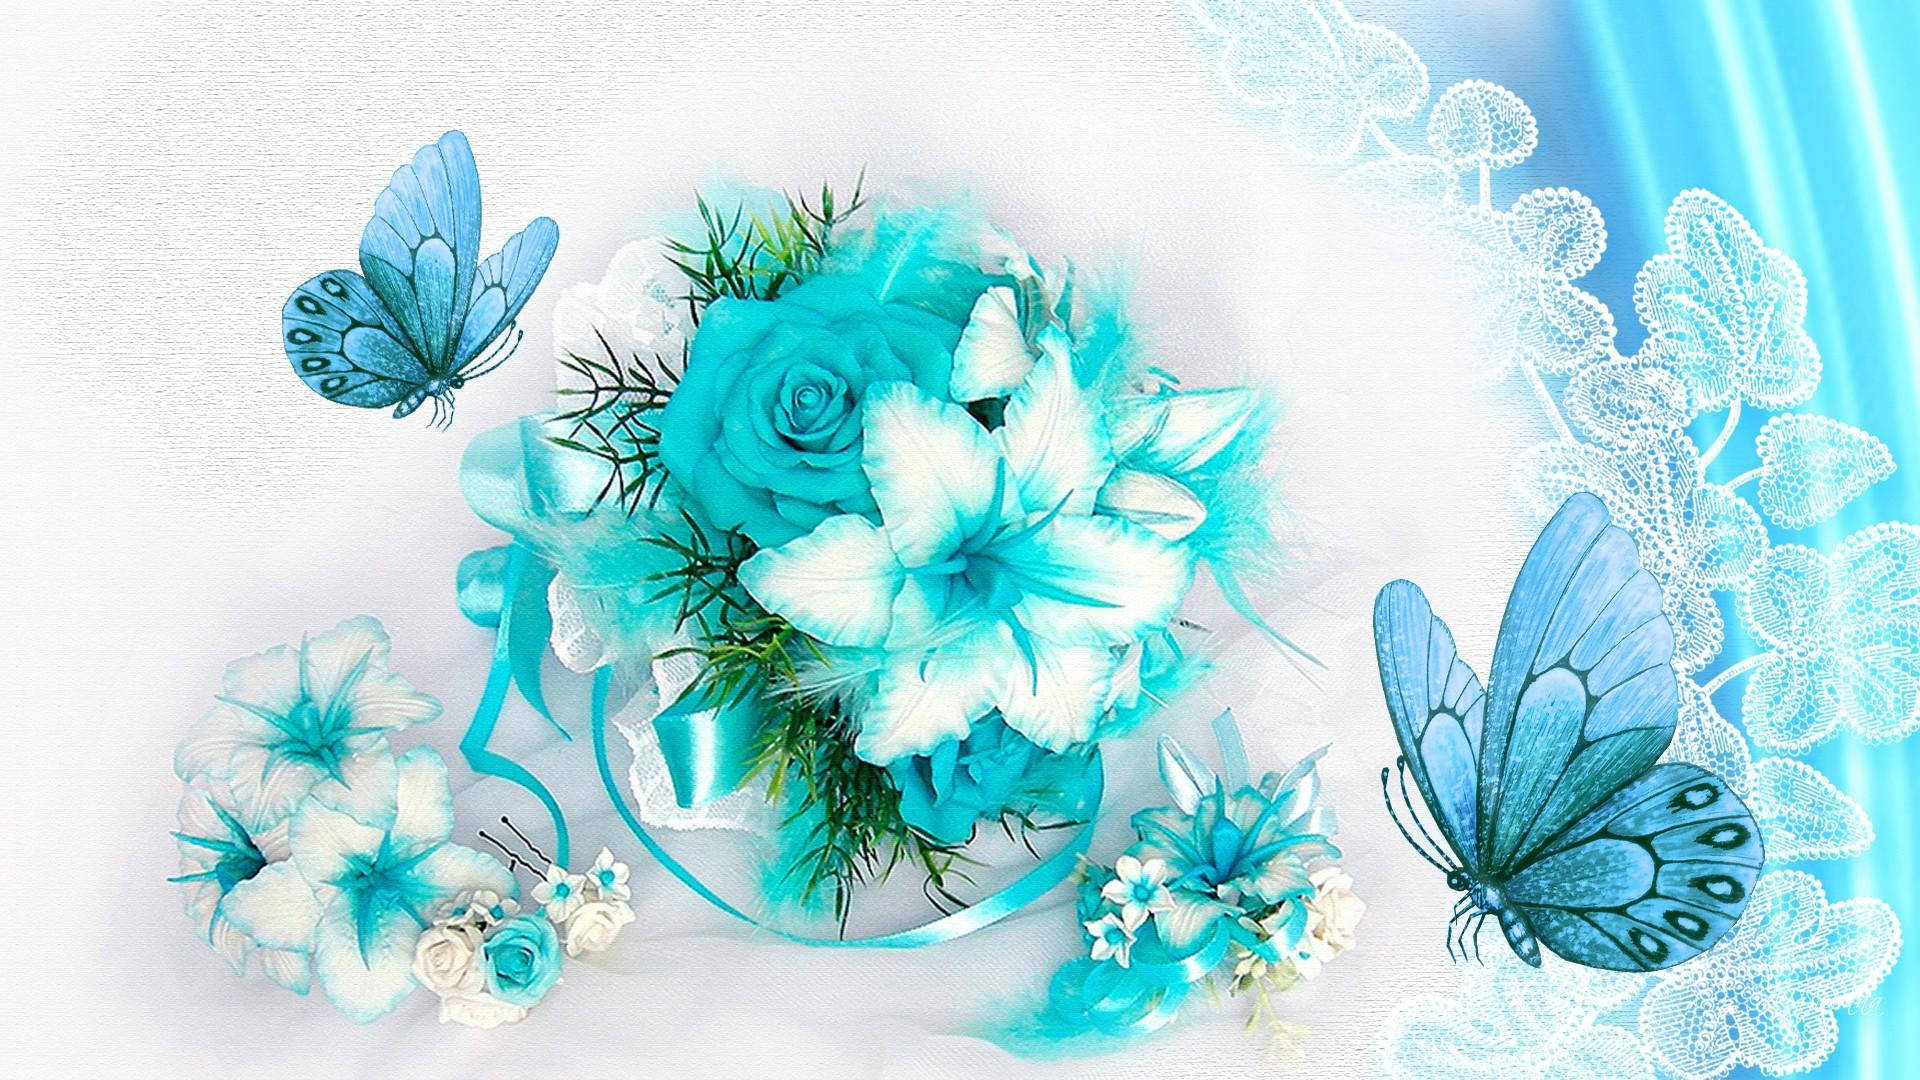 1920X1080 Blue Butterfly Wallpaper and Background